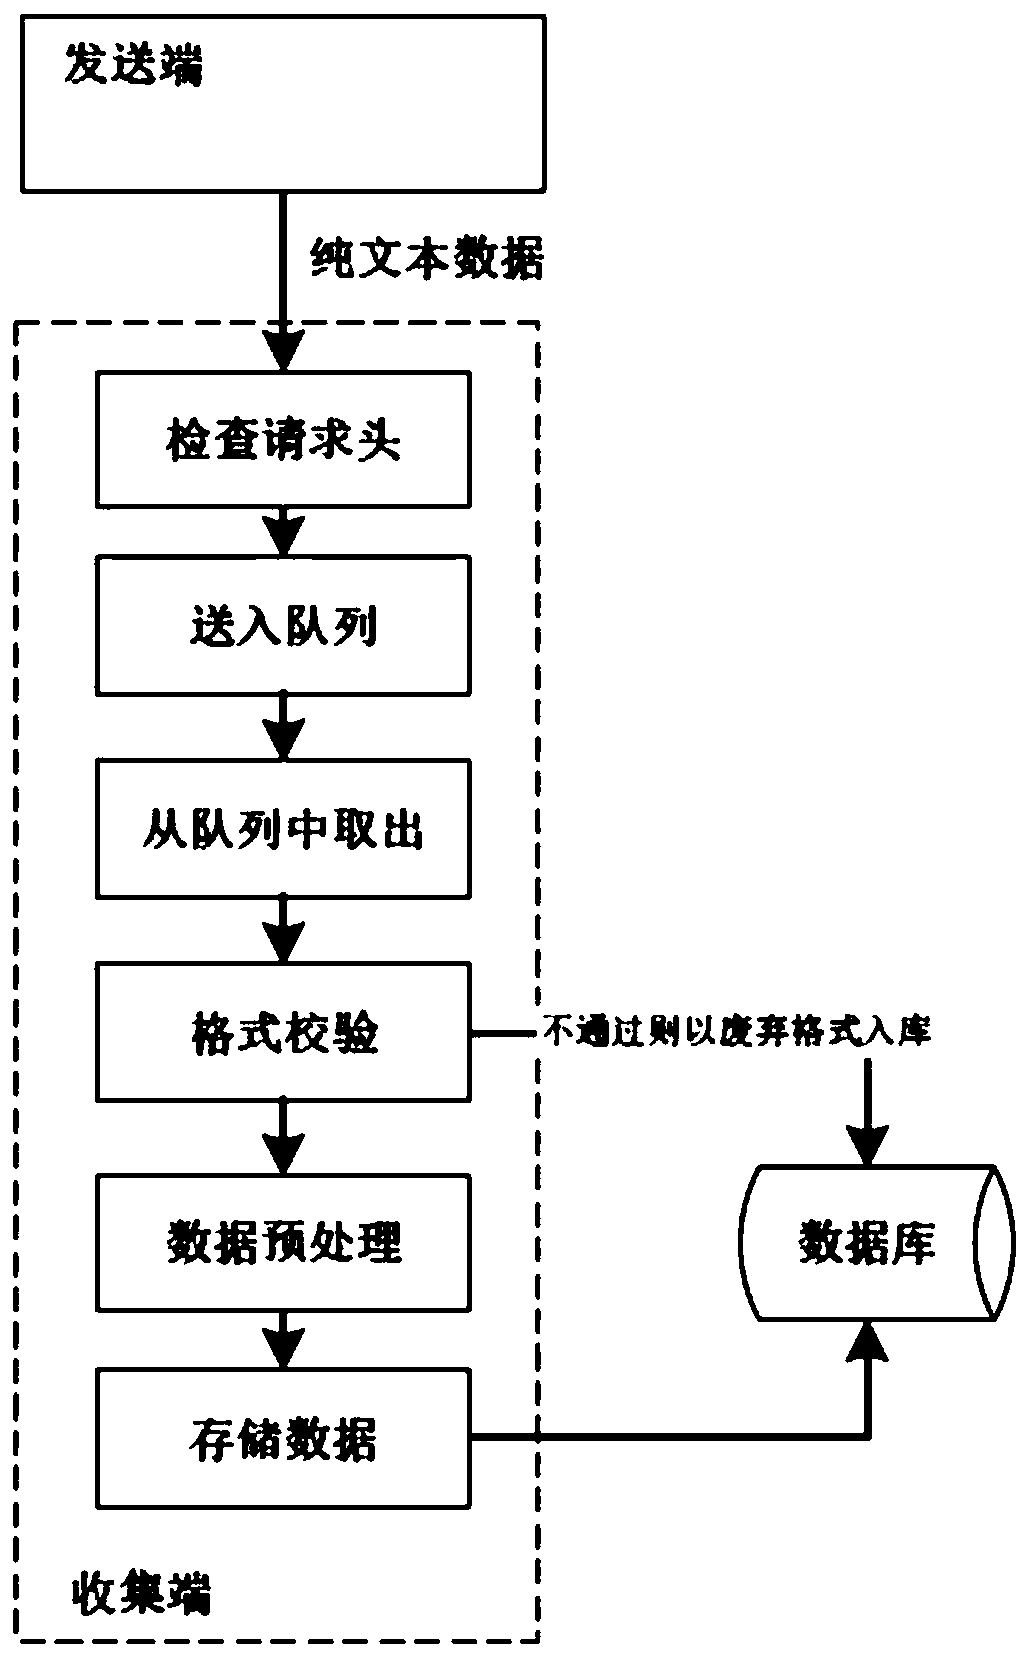 Mobile terminal software quality situation awareness system and method based on network request data